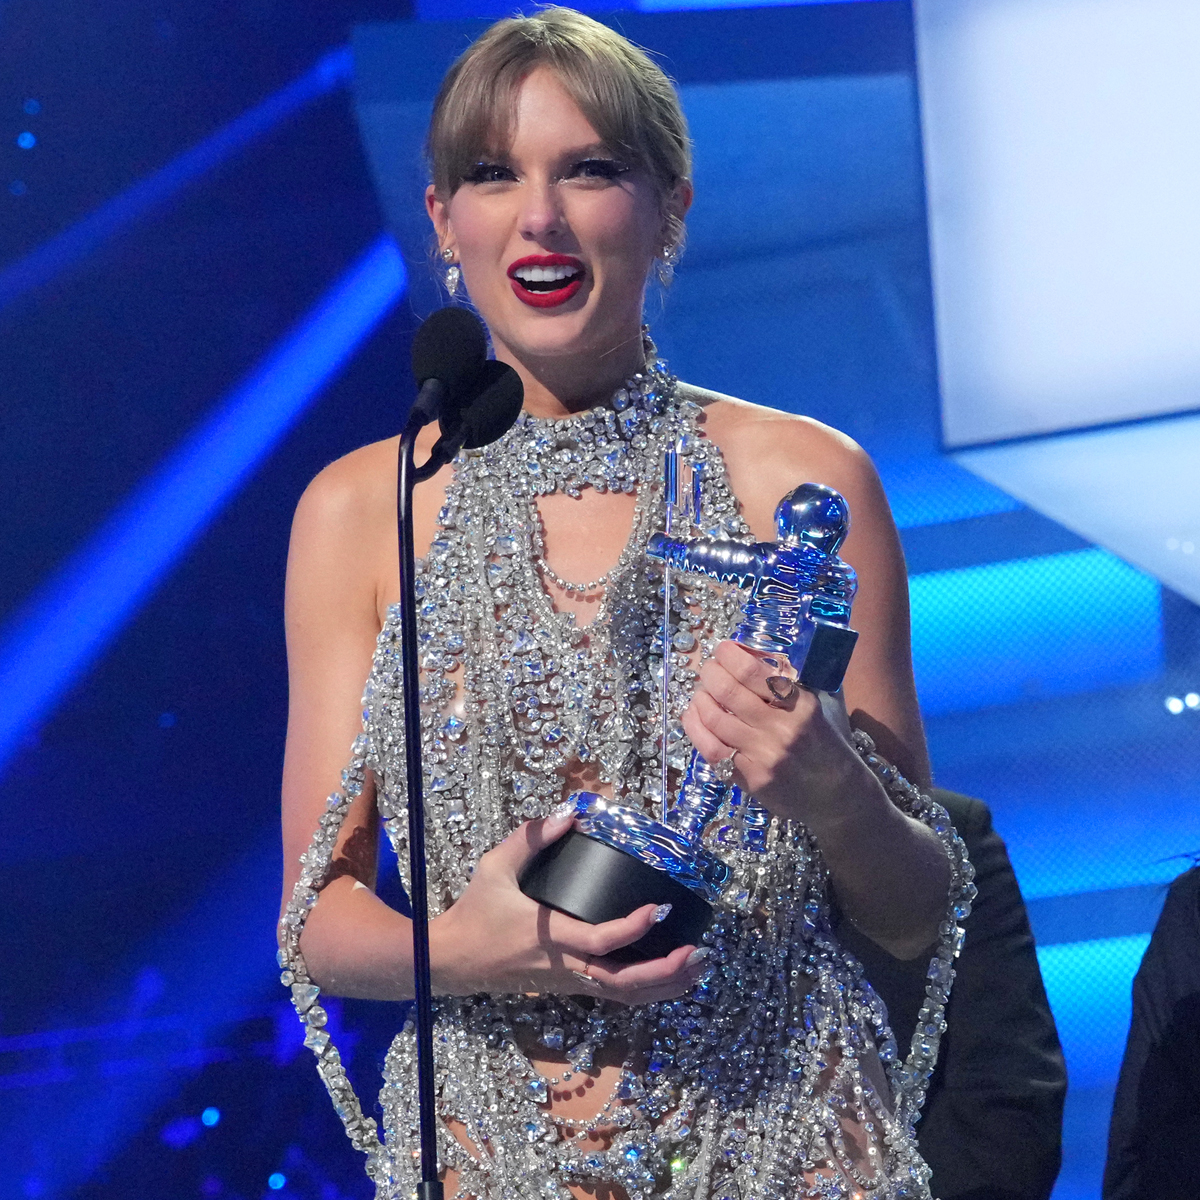 See Taylor Swift’s Starry VMA Party Look After Announcing New Album